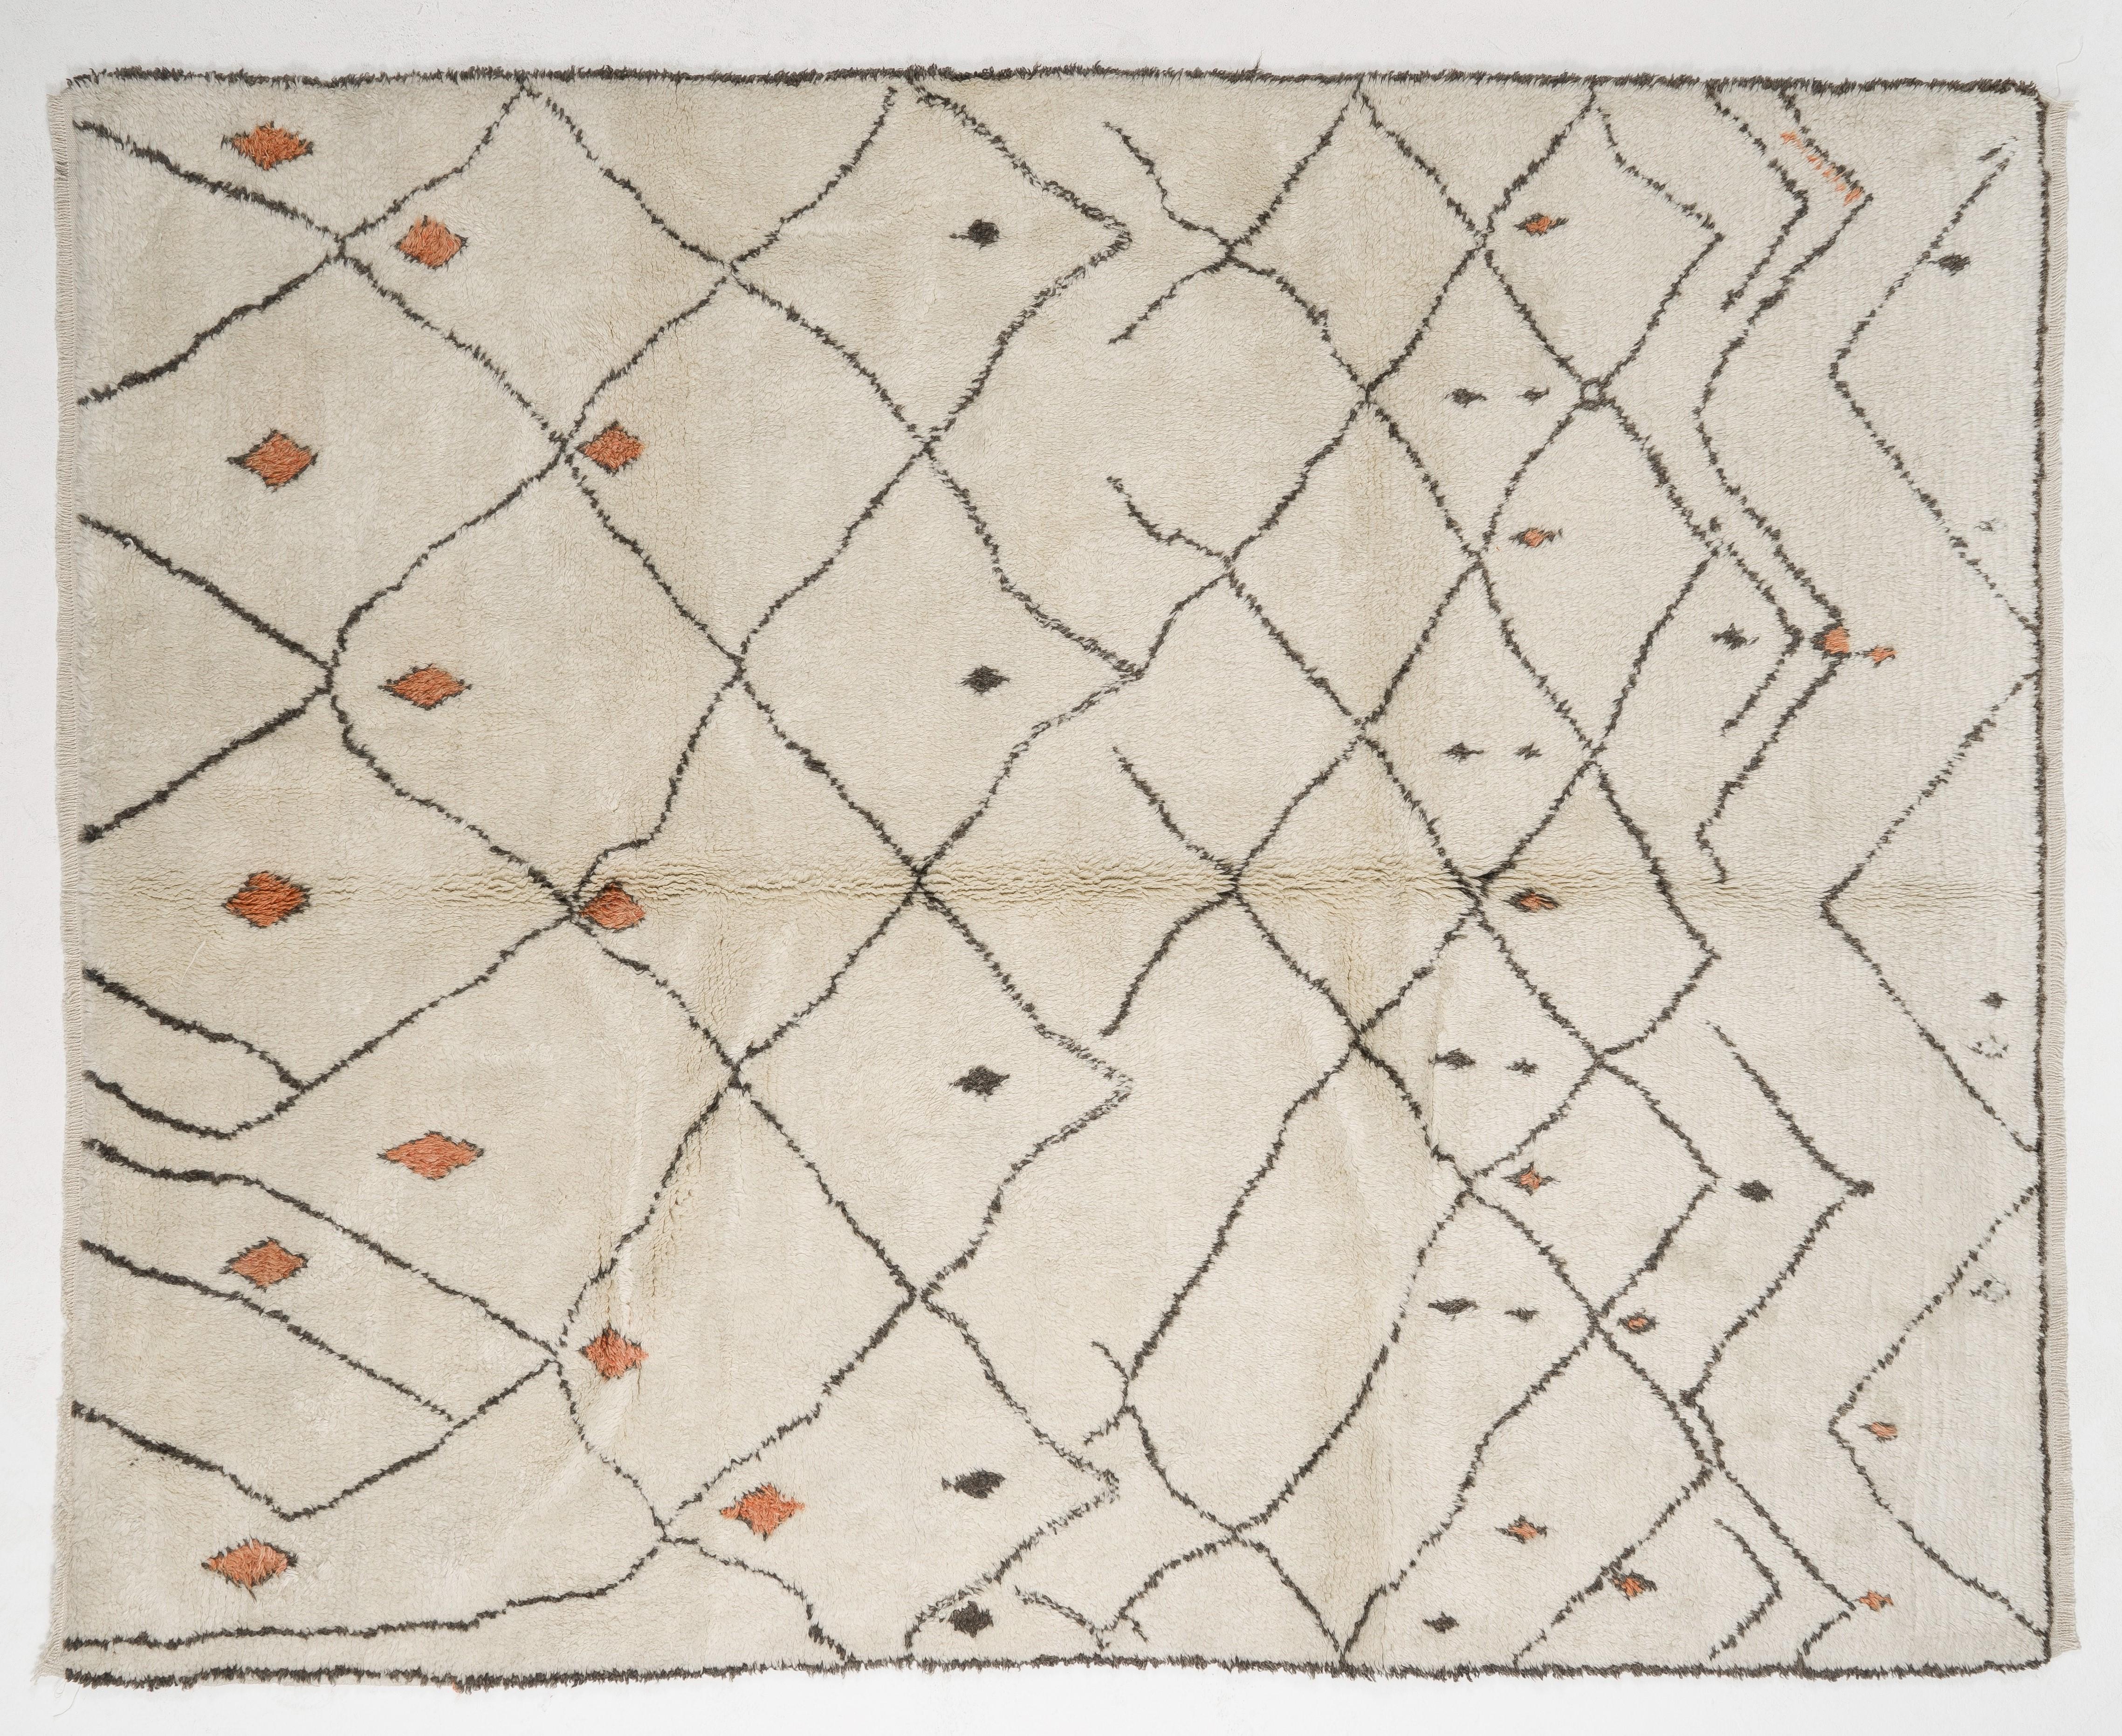 A contemporary handmade Moroccan rug with thick soft pile, made of natural un-dyed cream and brown wool. The rug features a contemporary looking dissolving diamonds pattern with some sparsely sprinkled smaller diamonds throughout in salmon orange